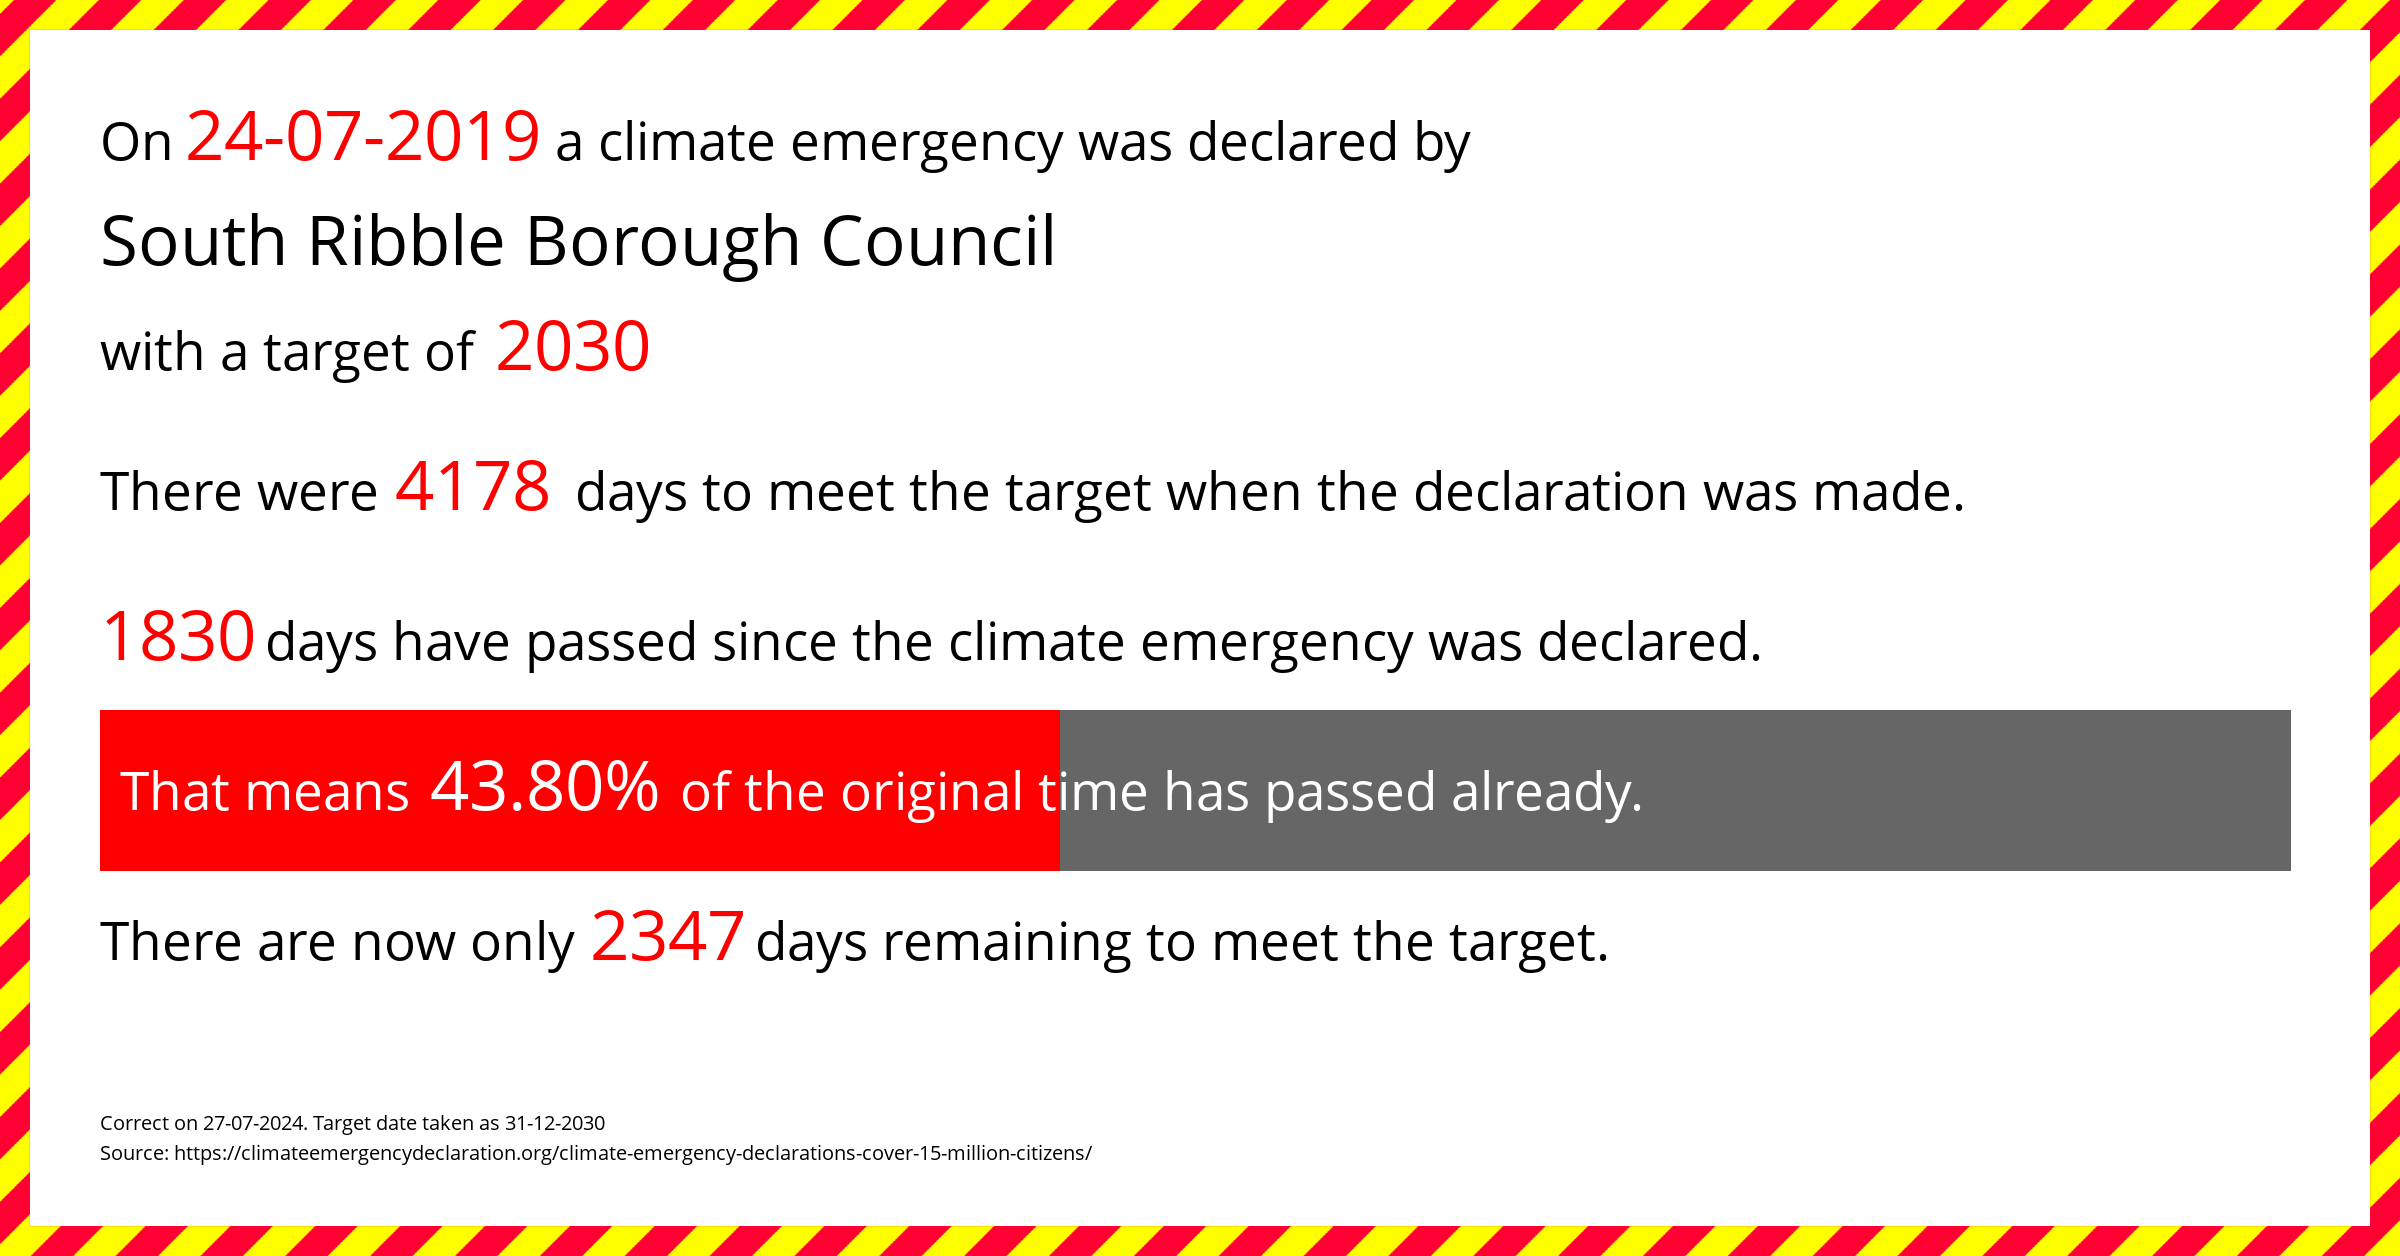 South Ribble Borough Council declared a Climate emergency on Wednesday 24th July 2019, with a target of 2030.